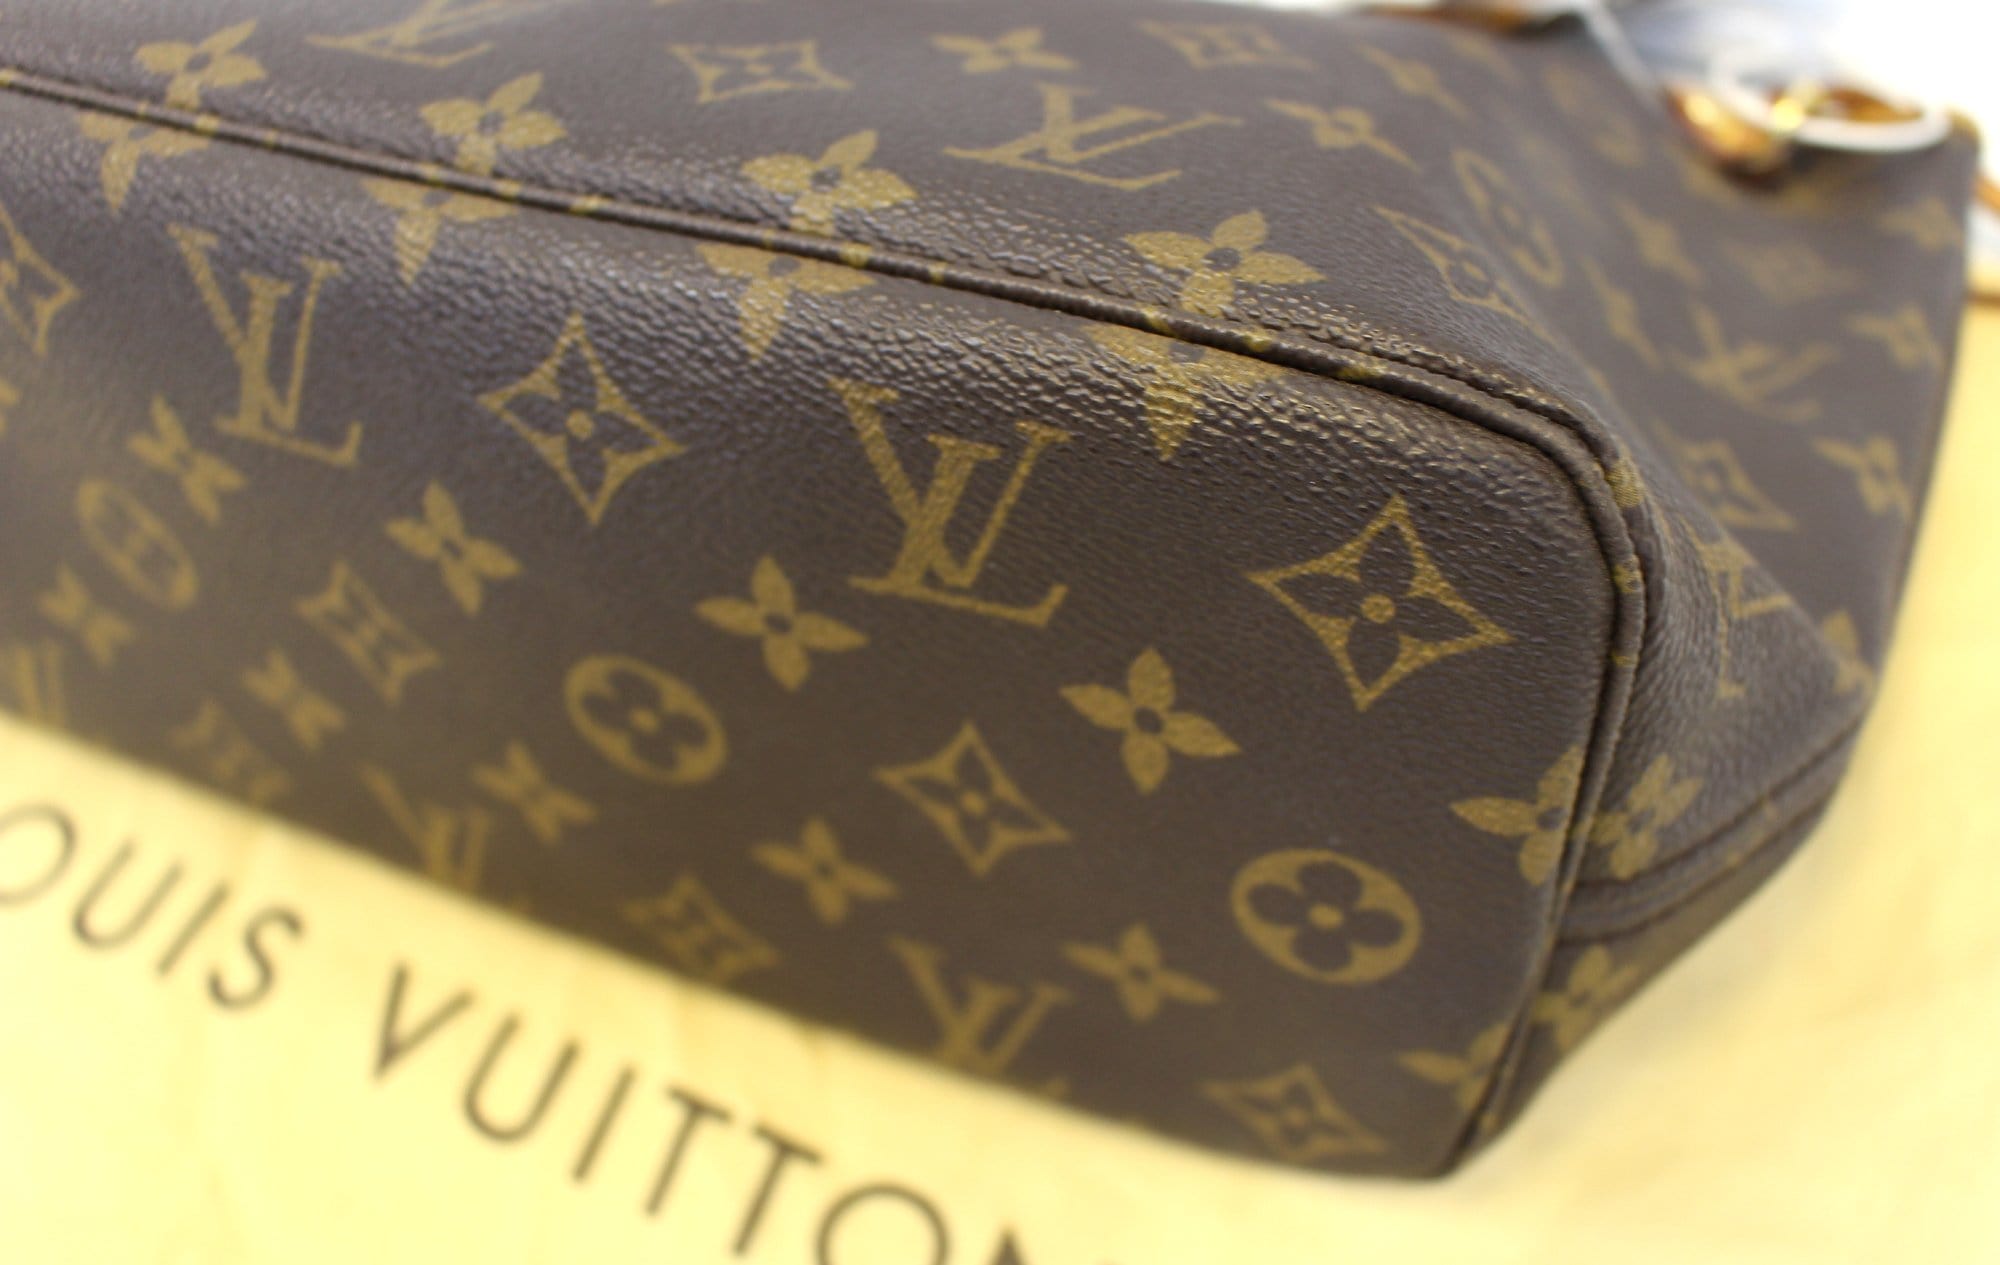 Louis+Vuitton+On+My+Side+Tote+PM+Black%2CBrown+Canvas%2CLeather+Monogram for  sale online